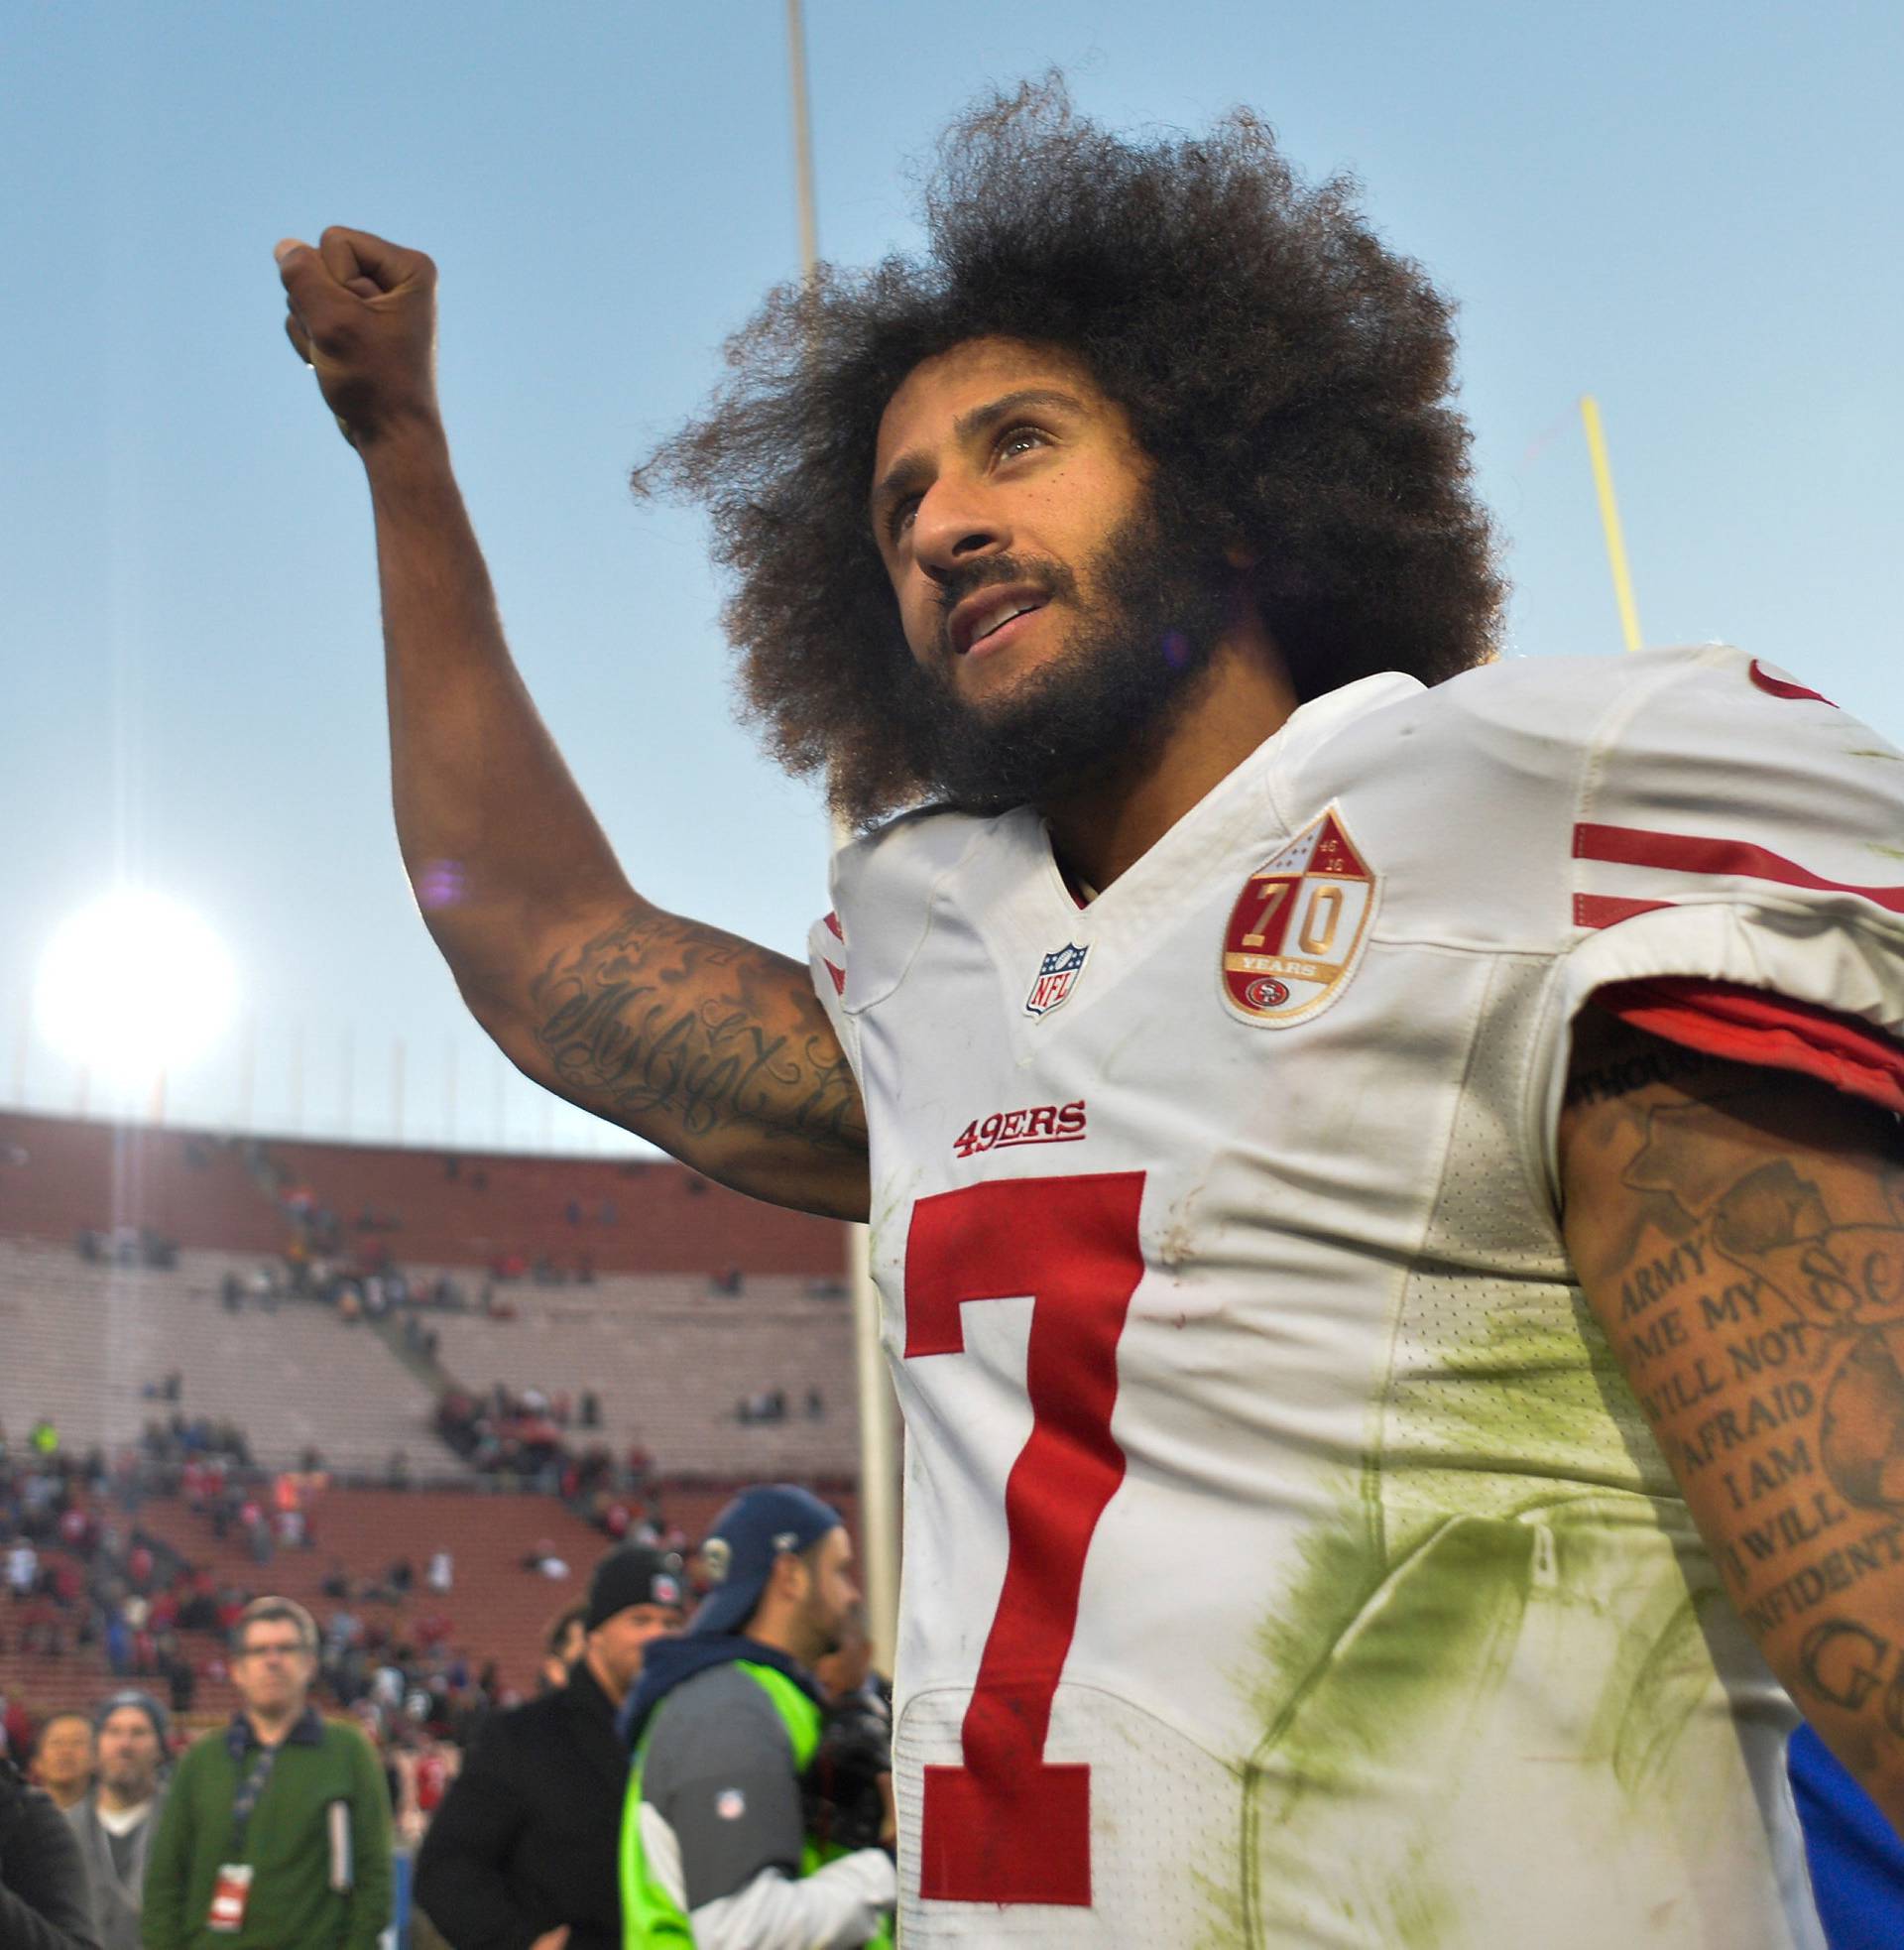 FILE PHOTO - Colin Kaepernick pumps his fist as he acknowledges the cheers at Los Angeles Memorial Coliseum in Los Angeles